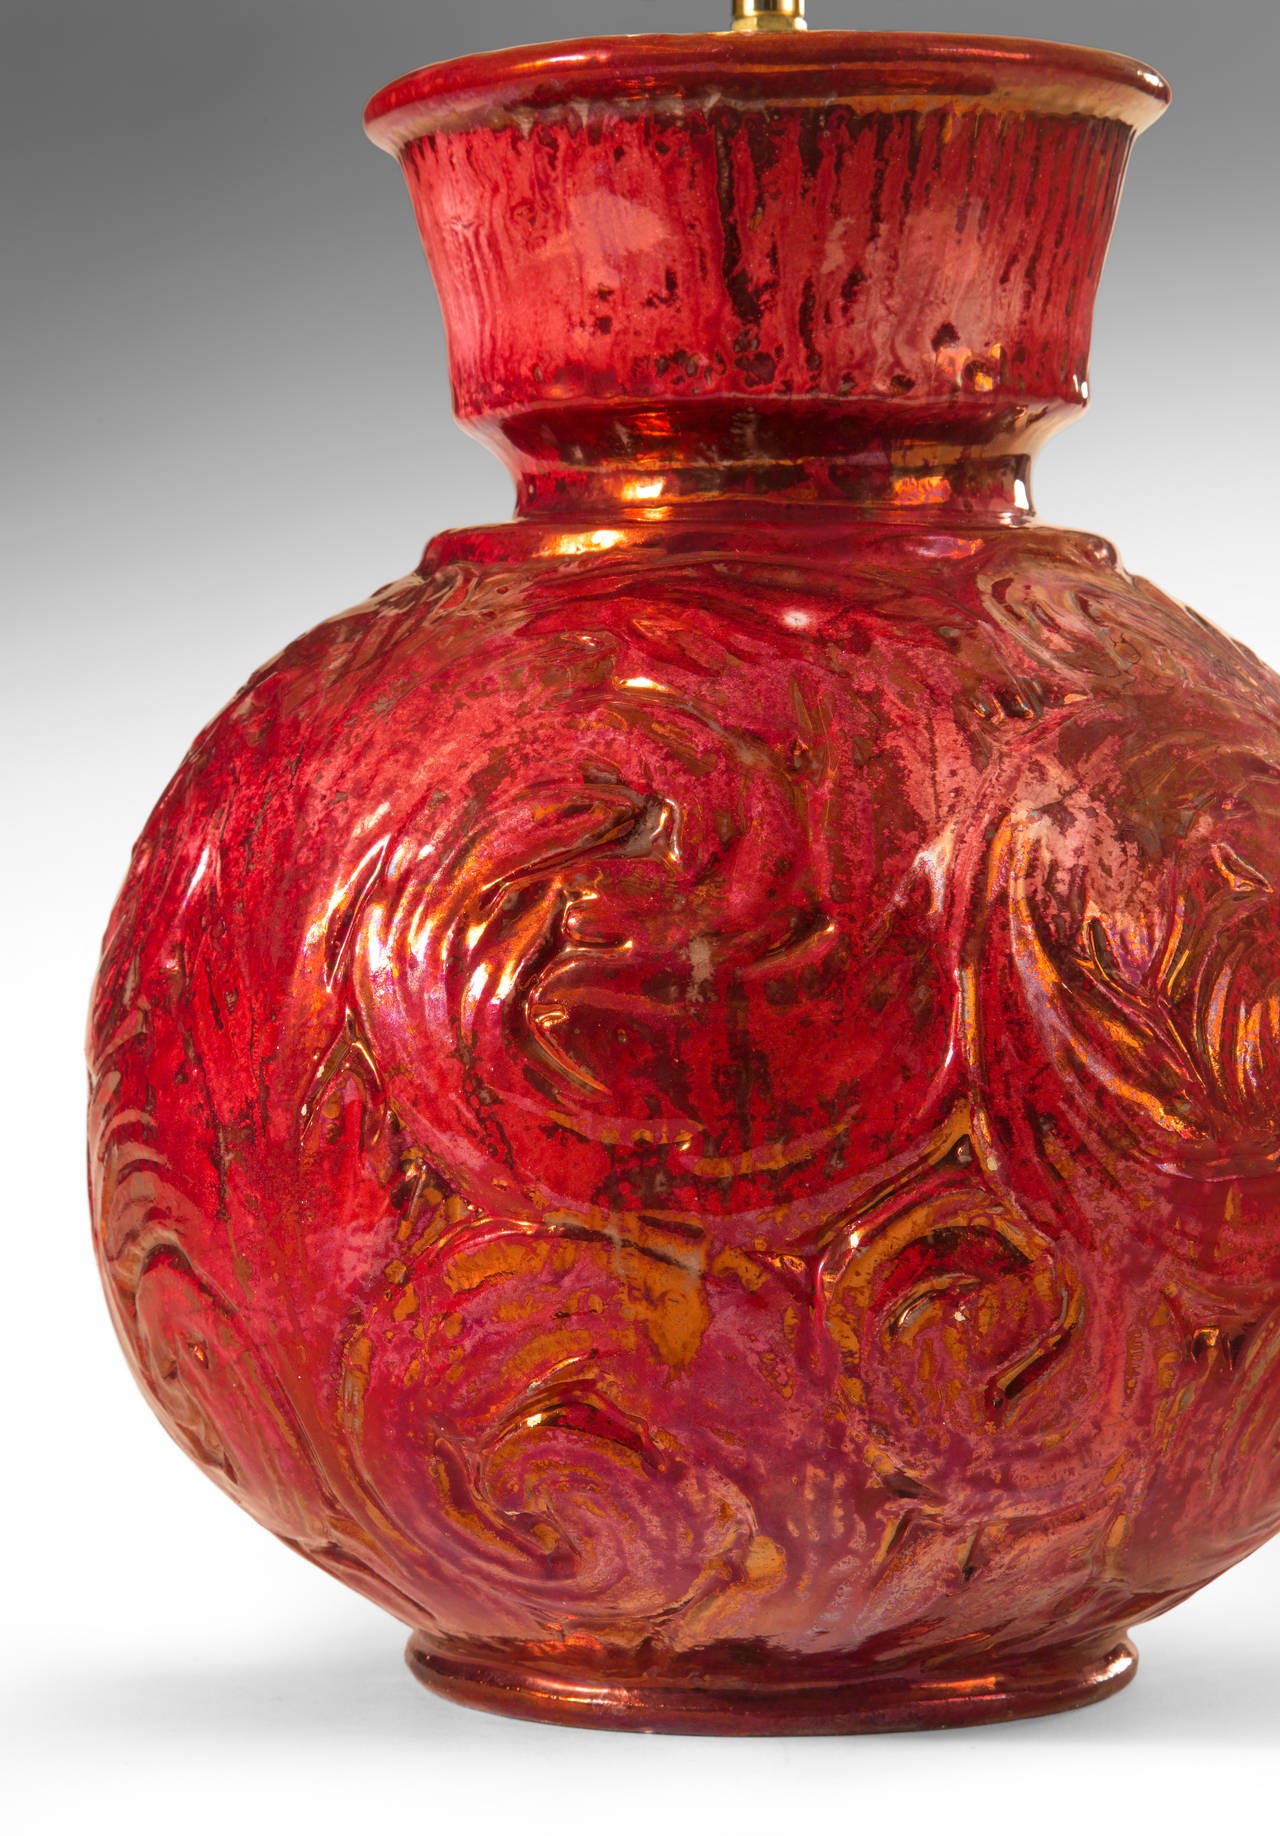 A highly unusual and beautifully executed glaze for Hammershøi. The tapering and fluted neck, recessed above a spherical body adorned with overlapping spirals. The whole in deep iridescent red glaze. Signed: HAK Danmark

Museum wired.